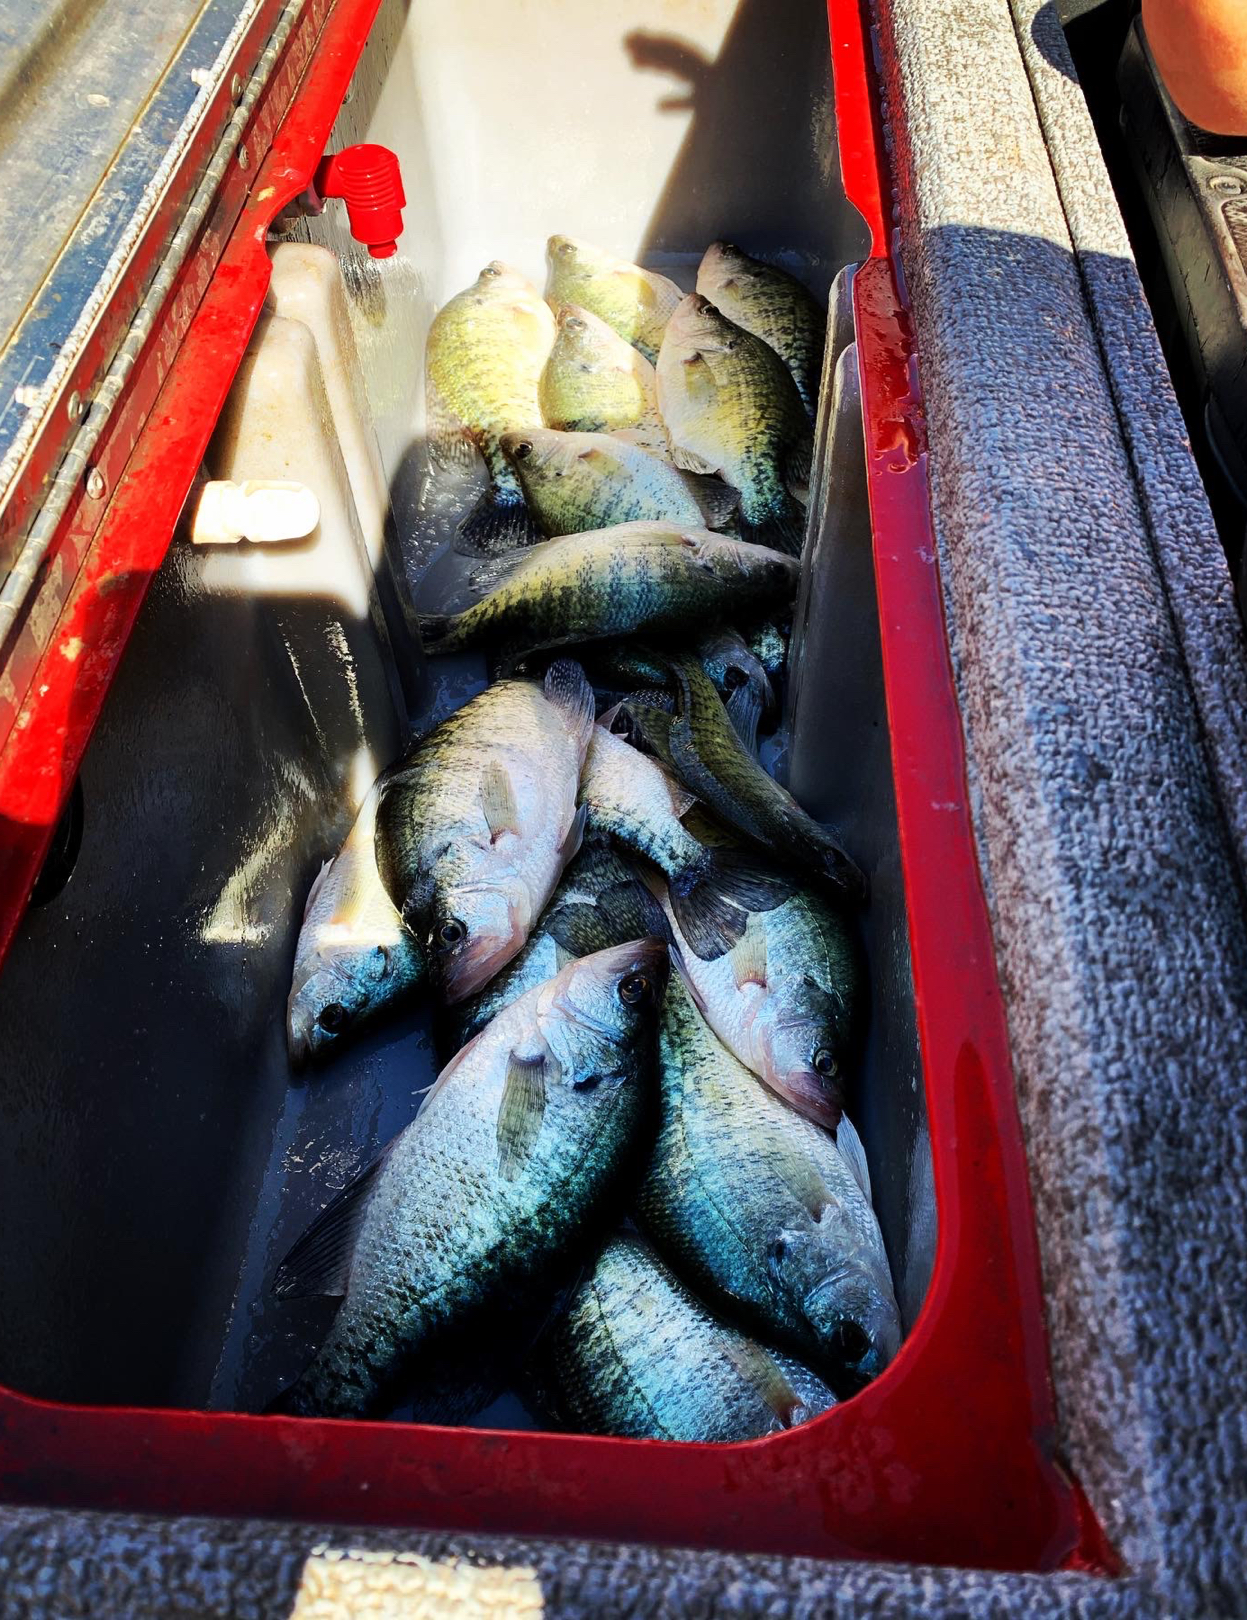 Oklahoma Crappie Fishing at its finest!